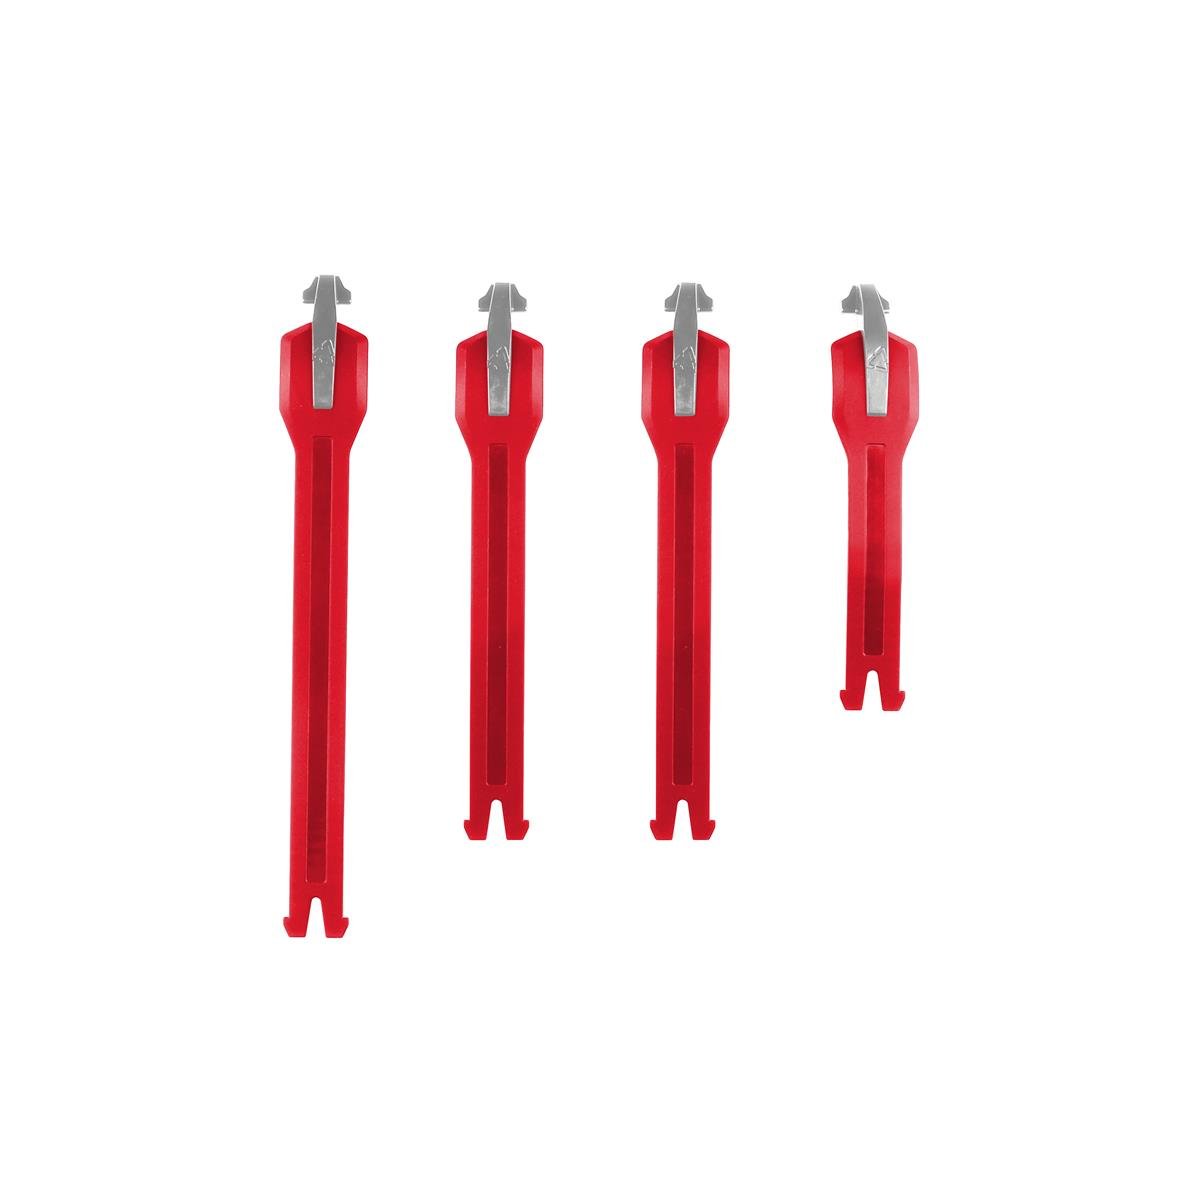 Leatt Replacement Buckle Kit GPX 5.5 Flexlock Red - 4 Pieces